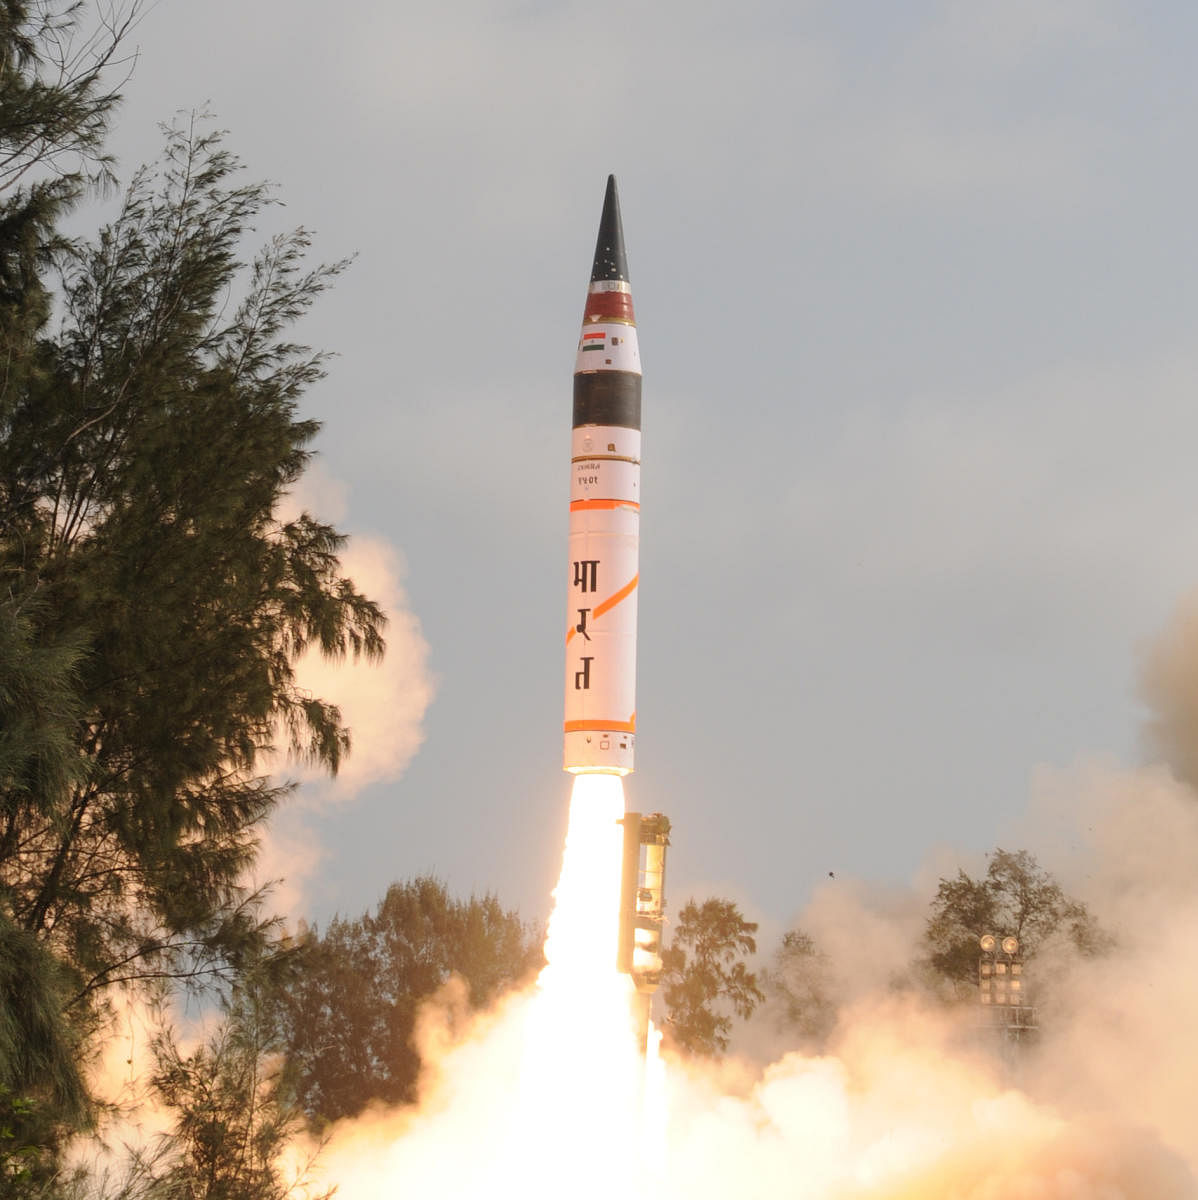 India is continuing to expand its nuke arsenal, says a new report.